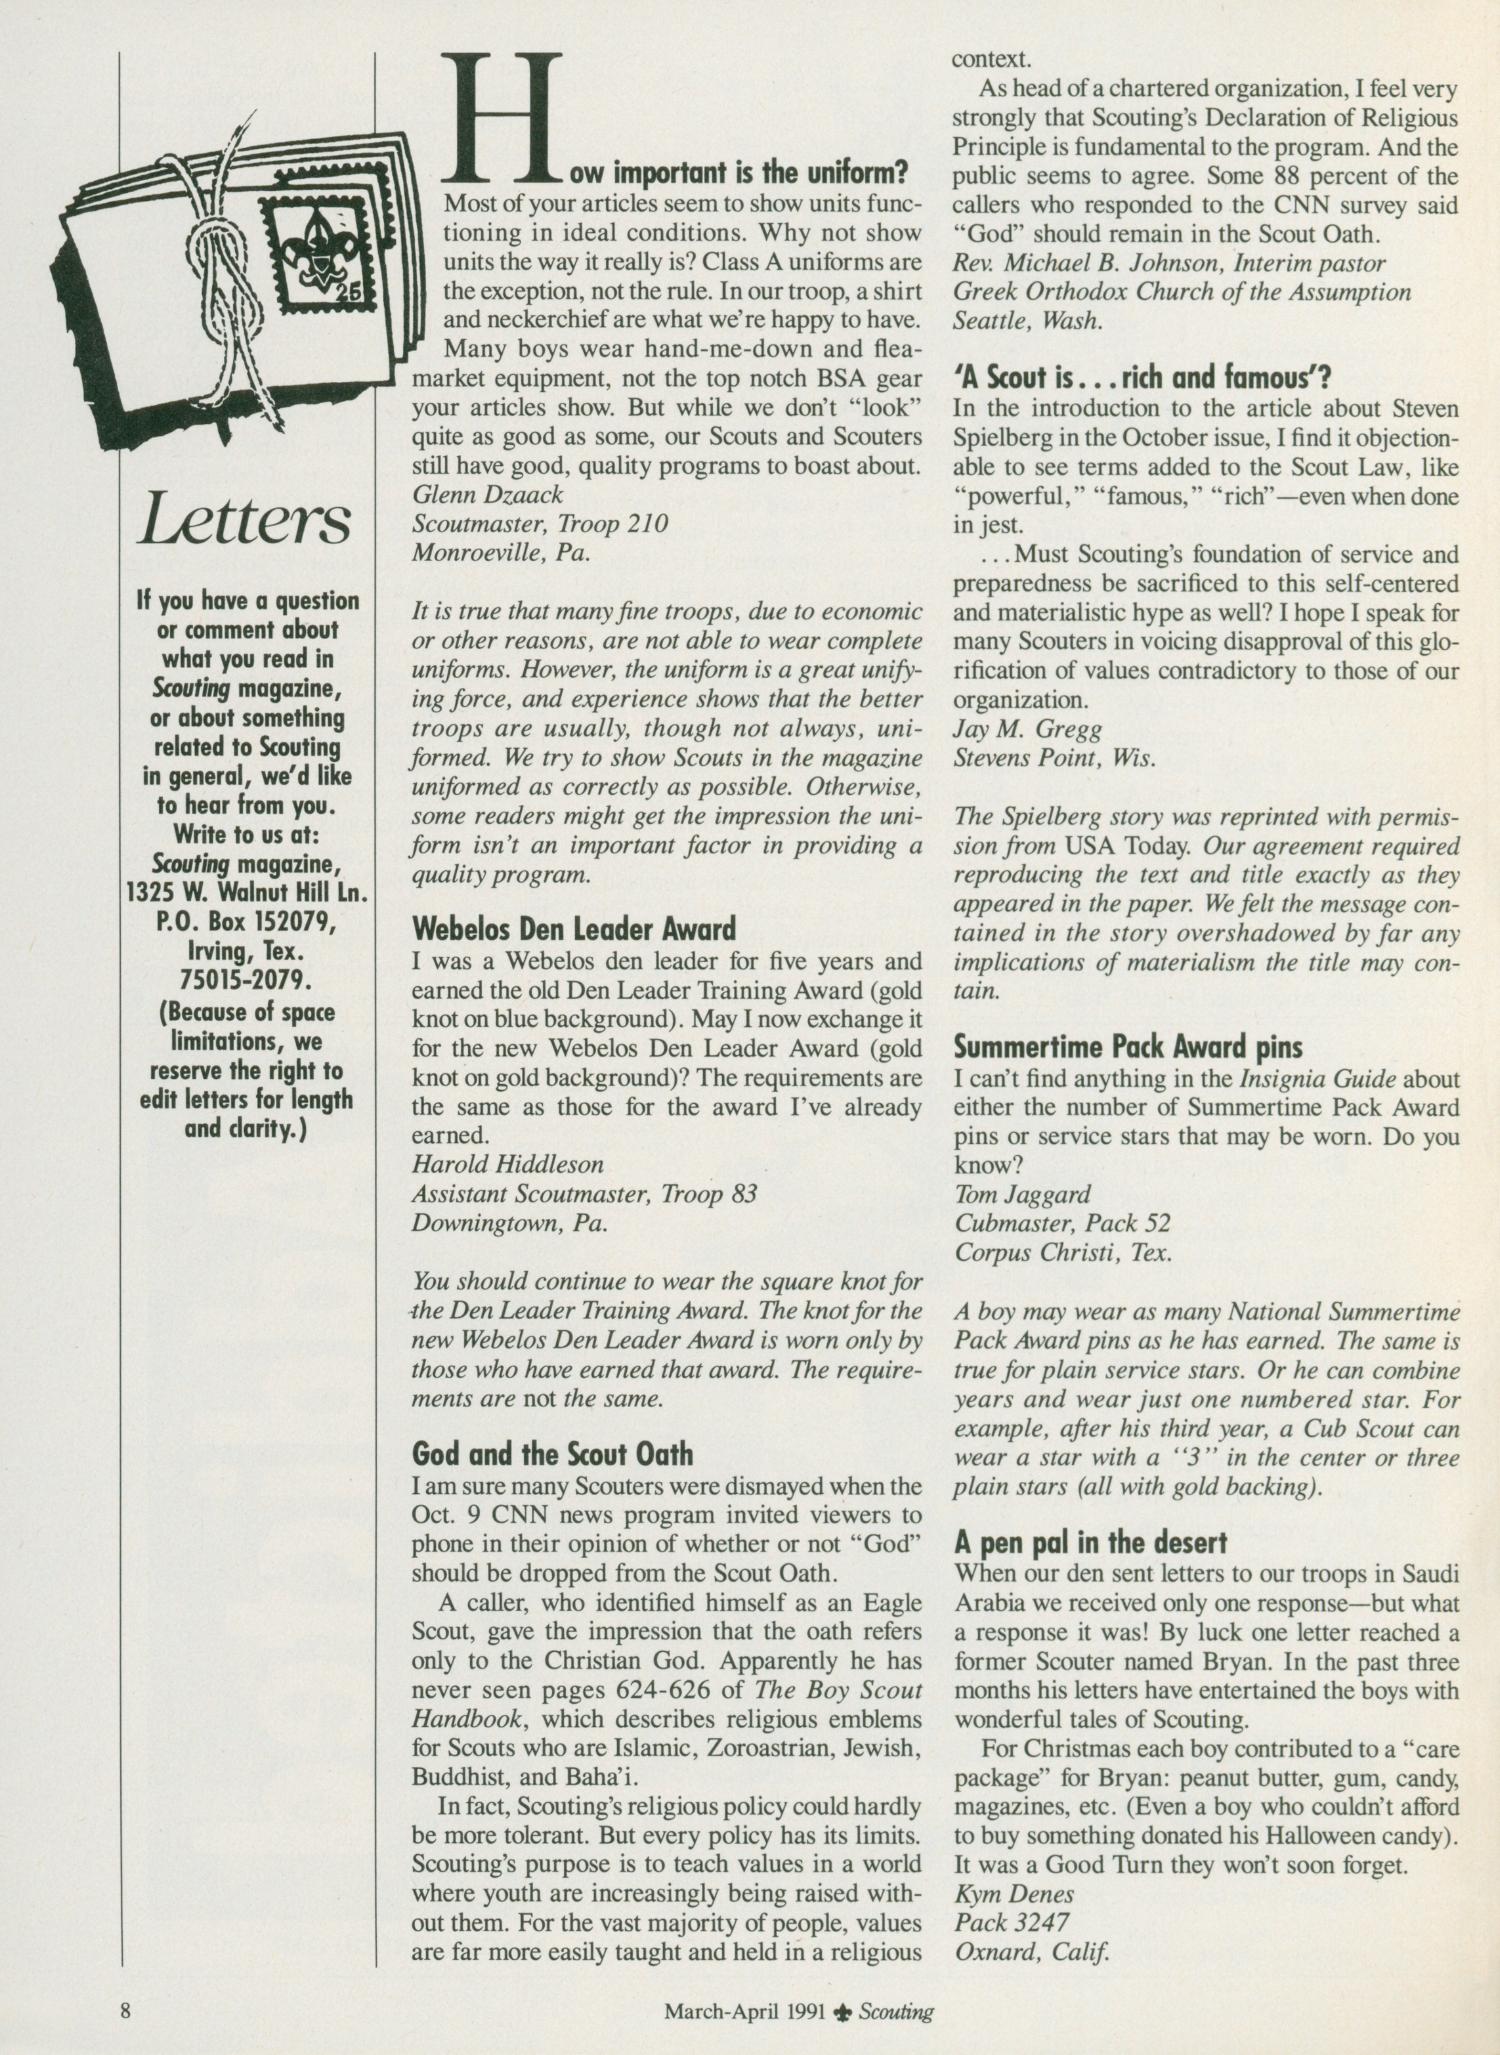 Scouting, Volume 79, Number 2, March-April 1991
                                                
                                                    8
                                                